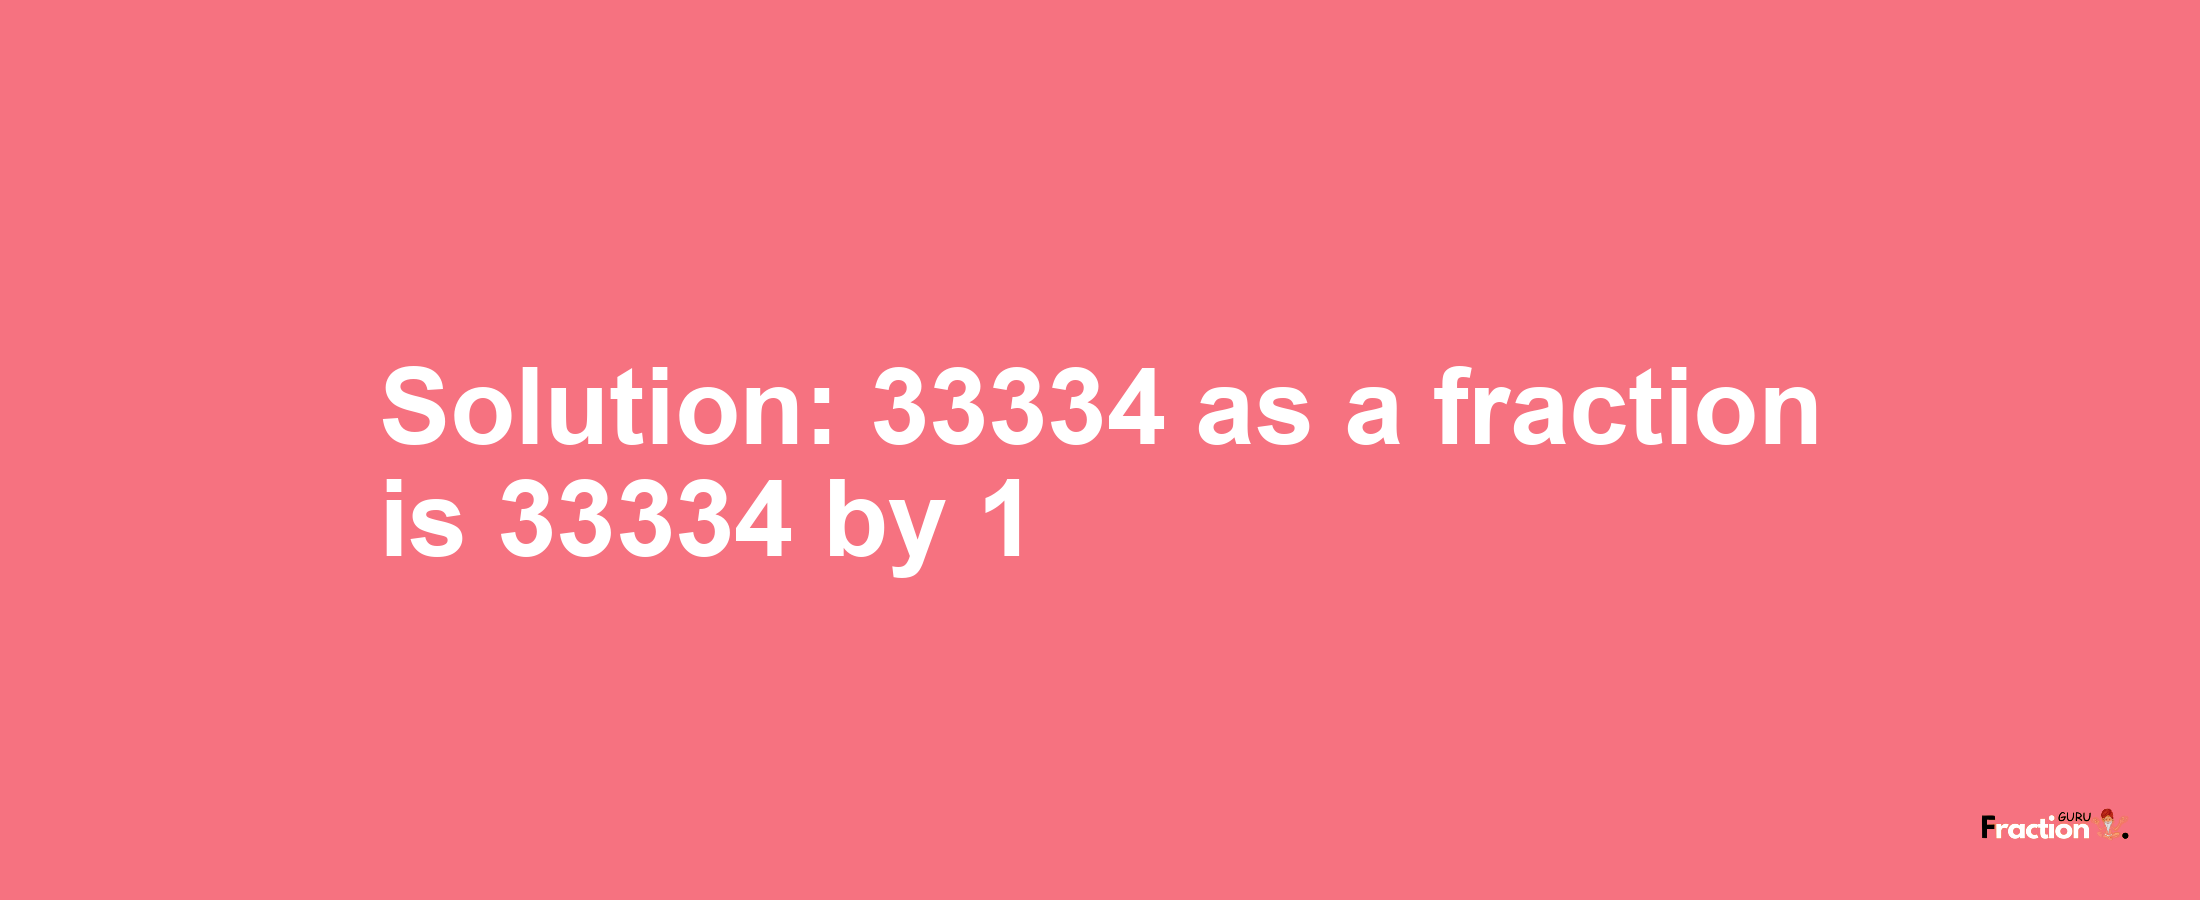 Solution:33334 as a fraction is 33334/1